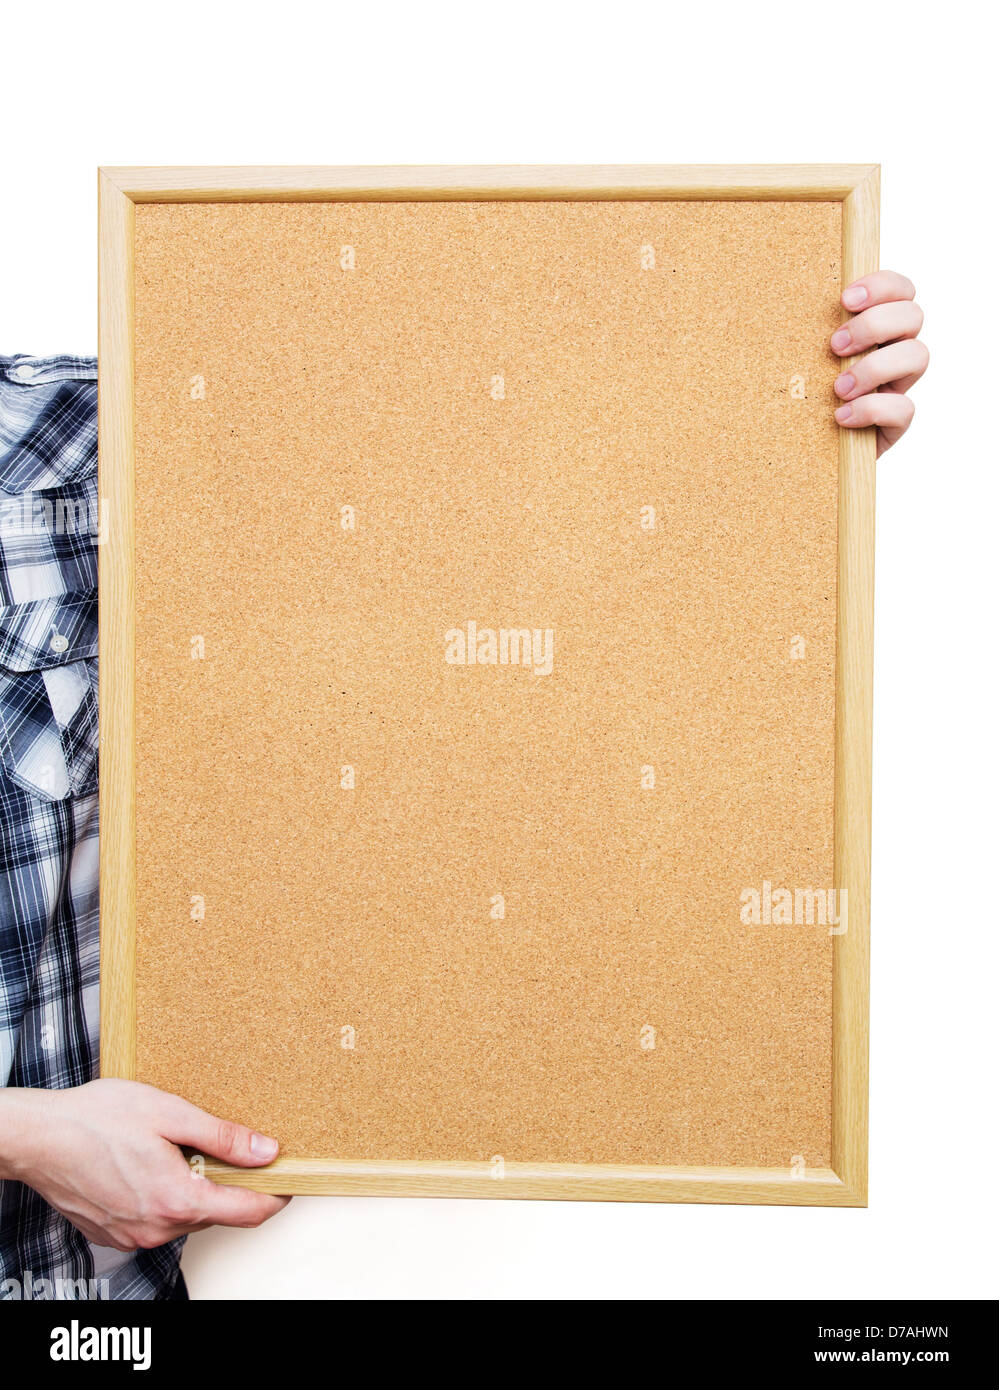 Man holding pin board on white background Stock Photo